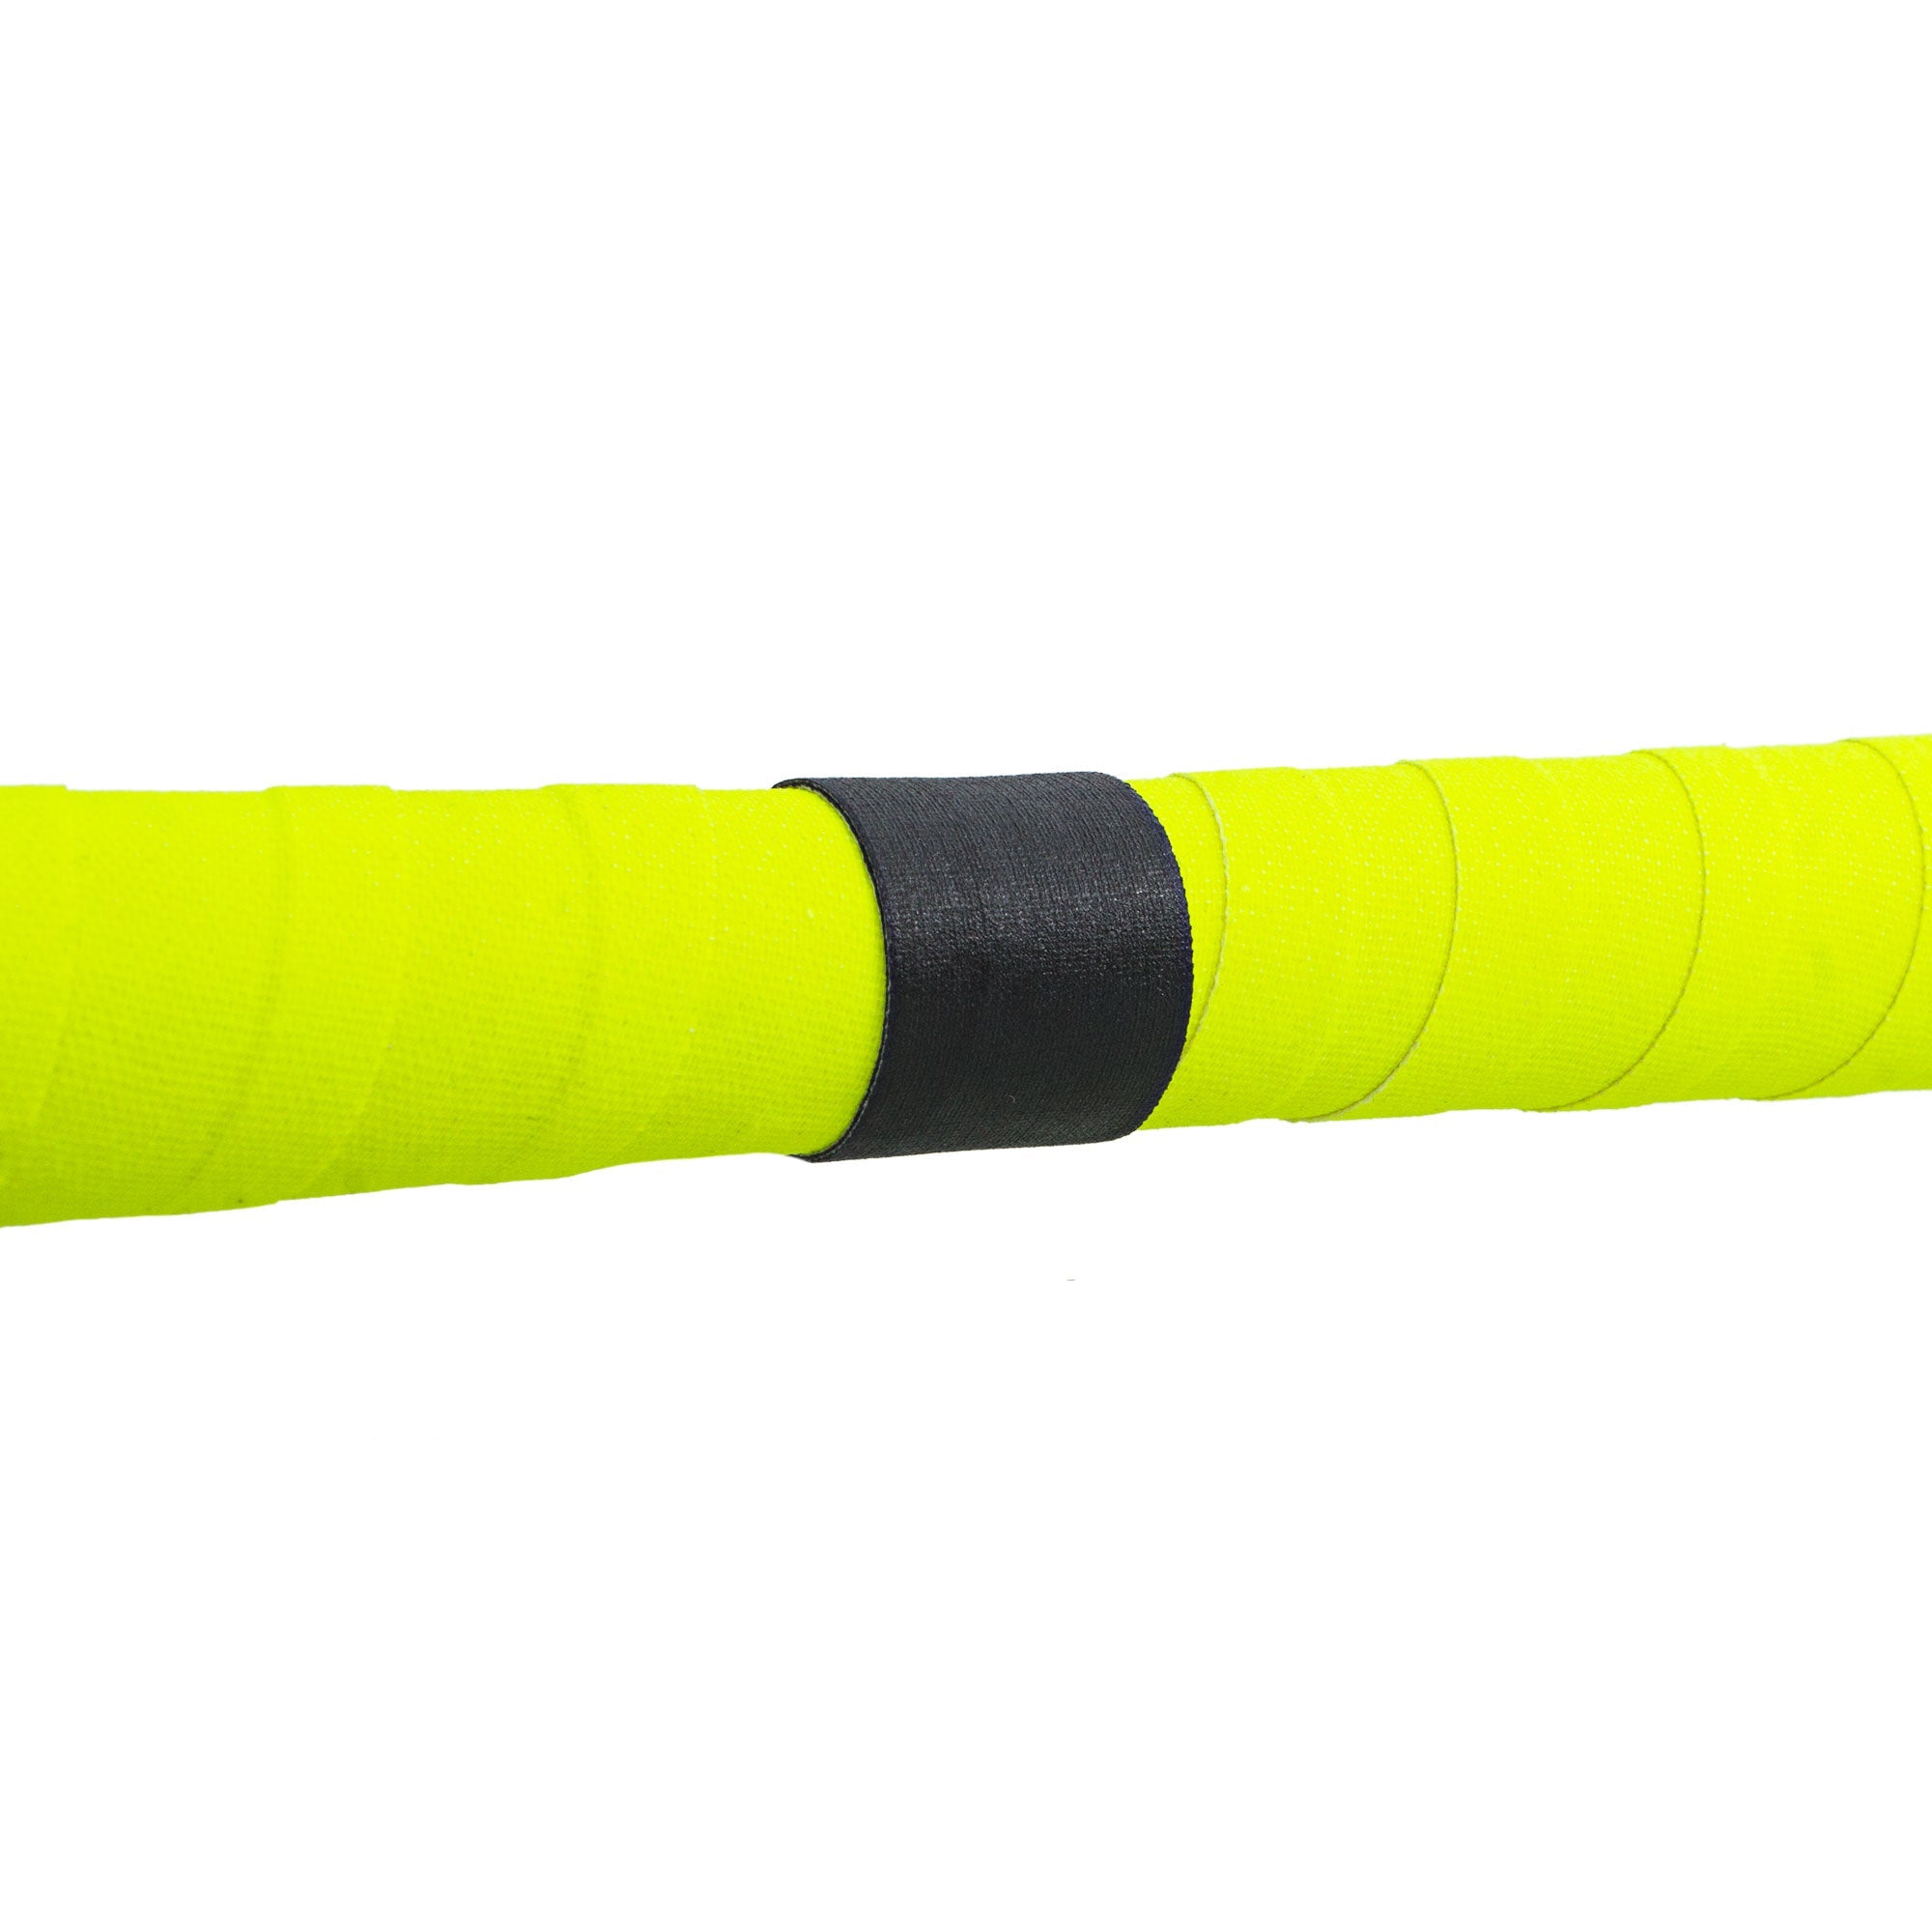 A close up of the centre of the yellow devilstick.